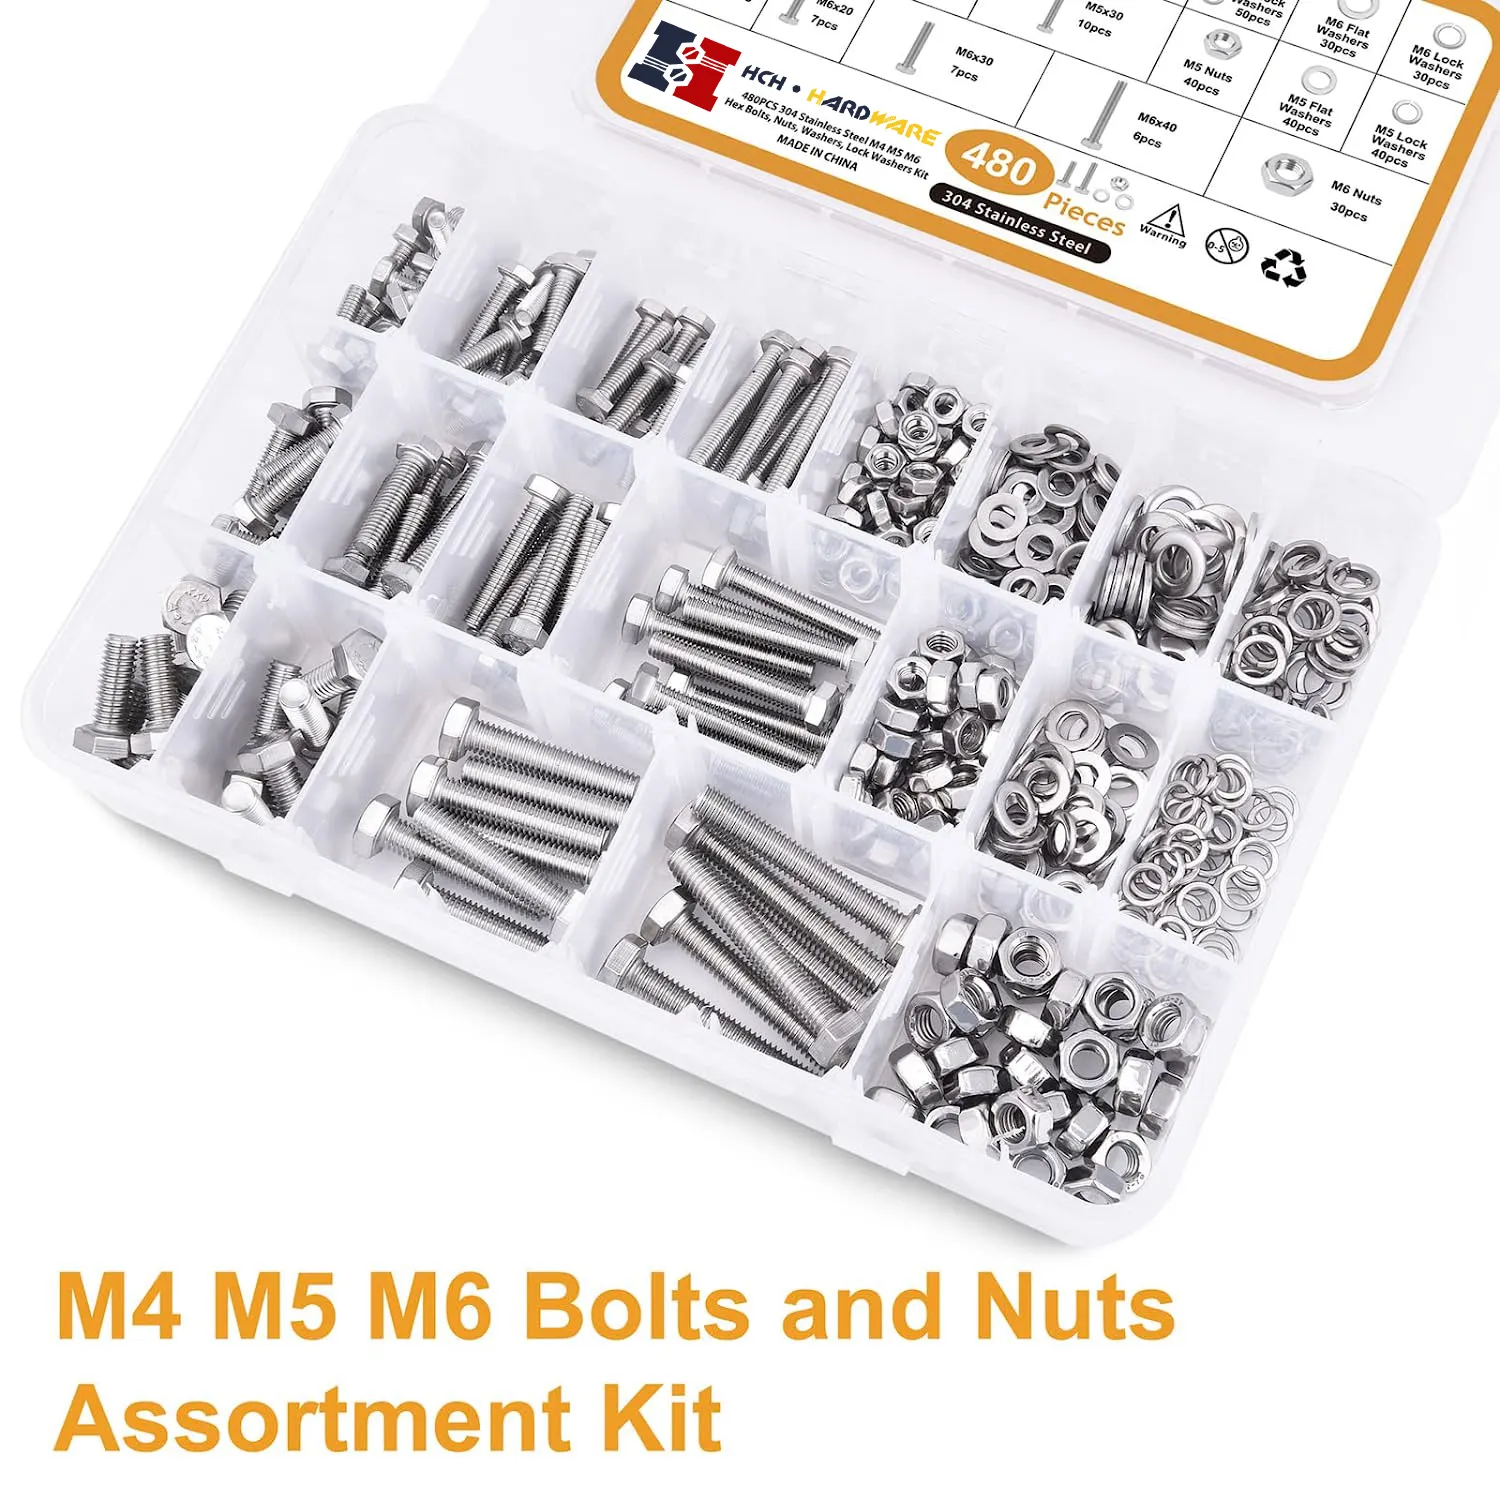 newlng Nuts and Bolts M3 M4 M5 M6 Screws and Nuts Kit 304 Stainless Steel hex socket round head bolt